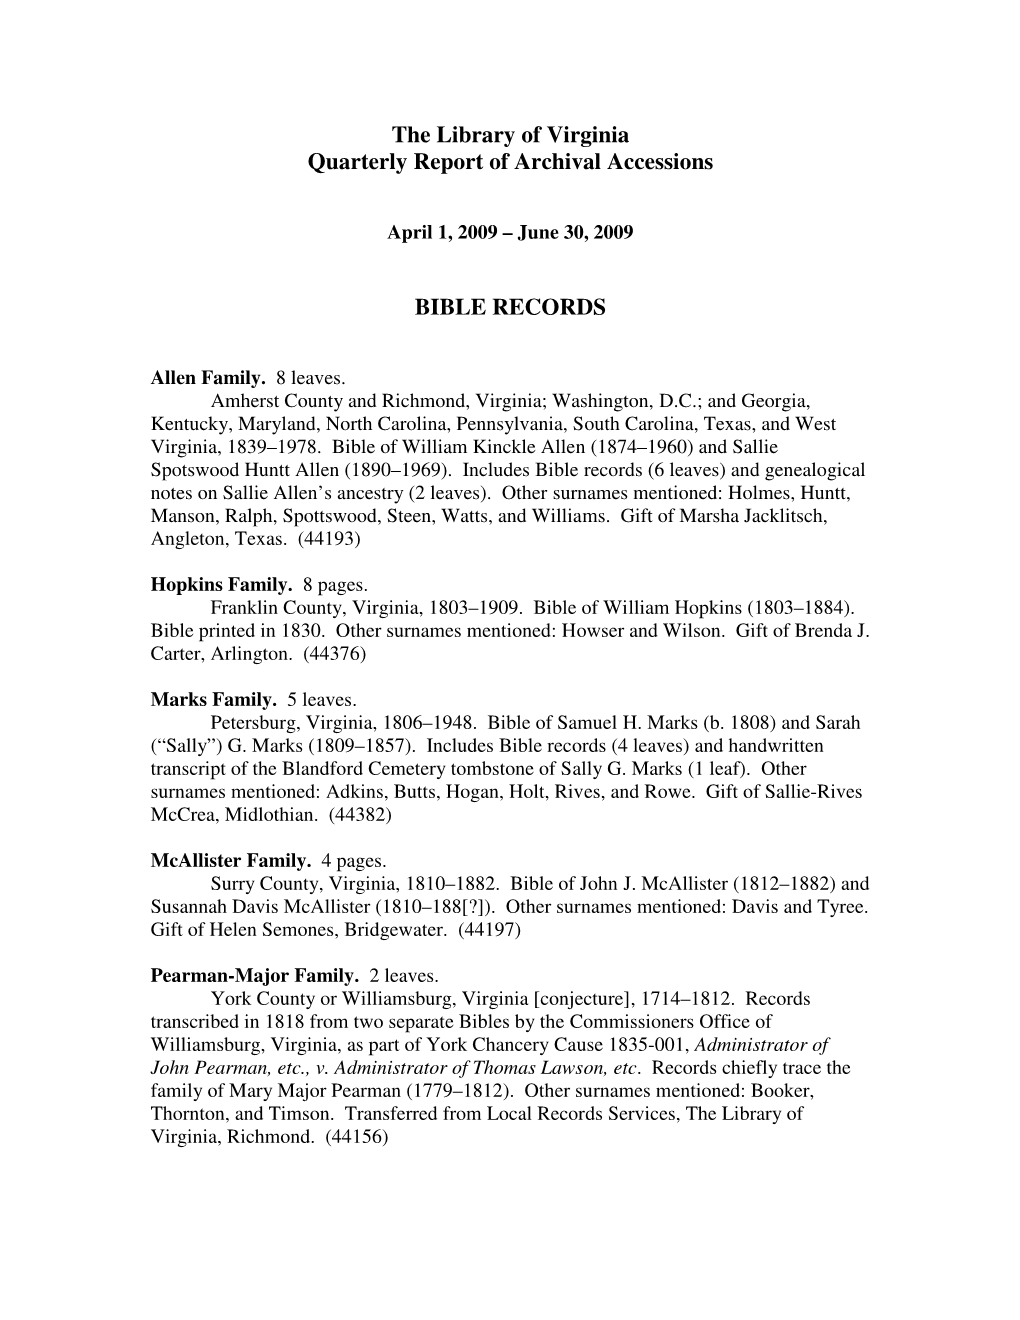 The Library of Virginia Quarterly Report of Archival Accessions